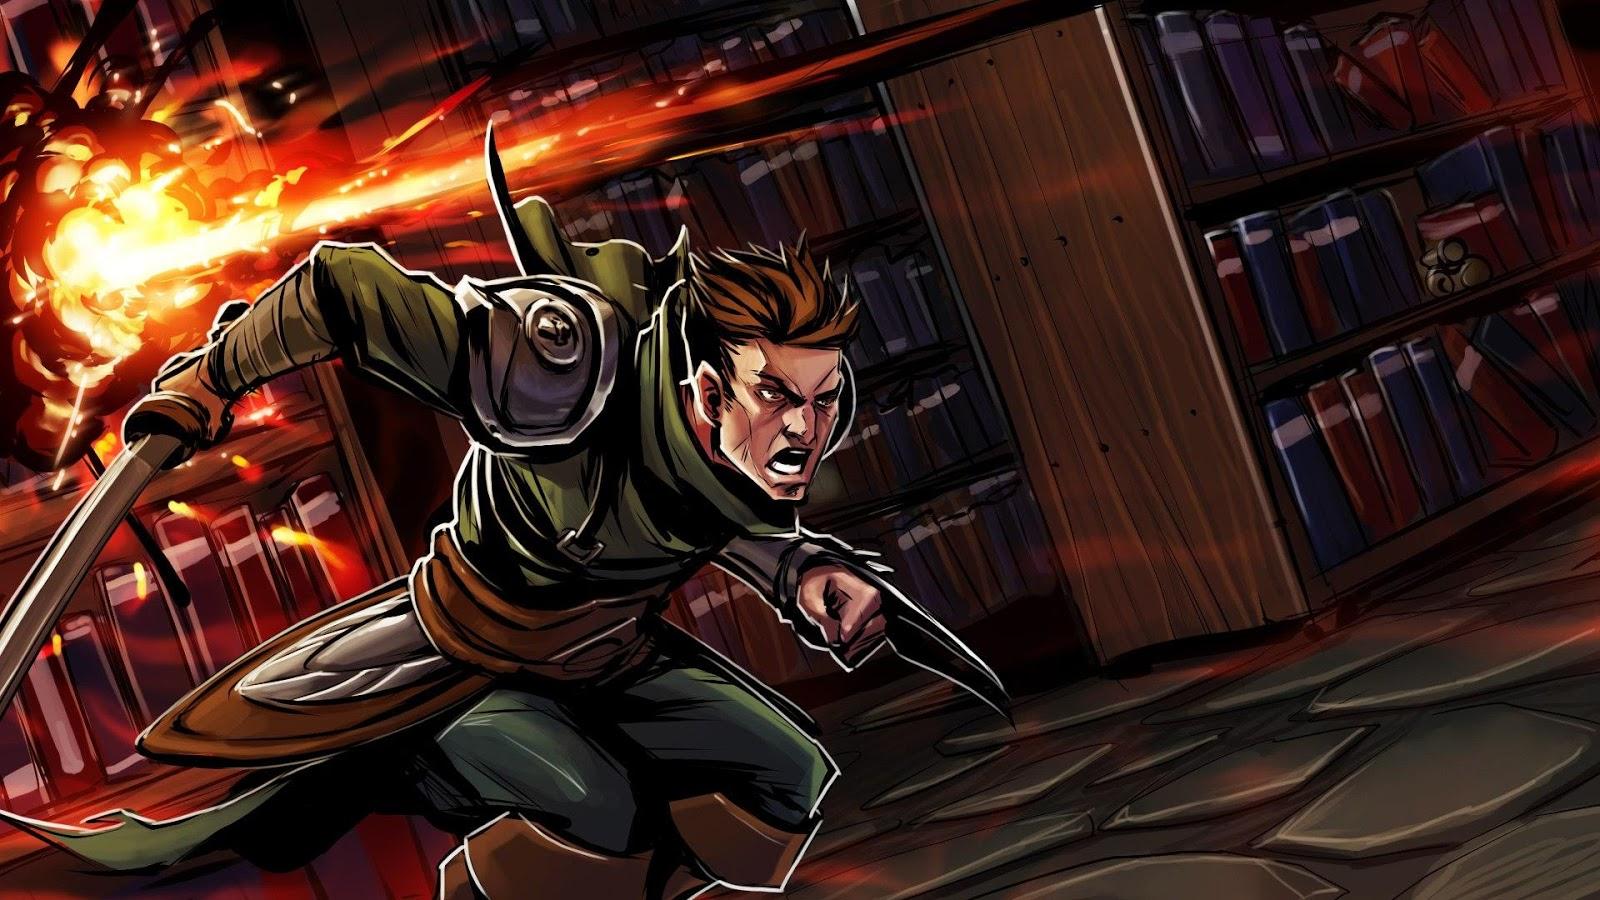 Juego Swordbreaker The Game para Android